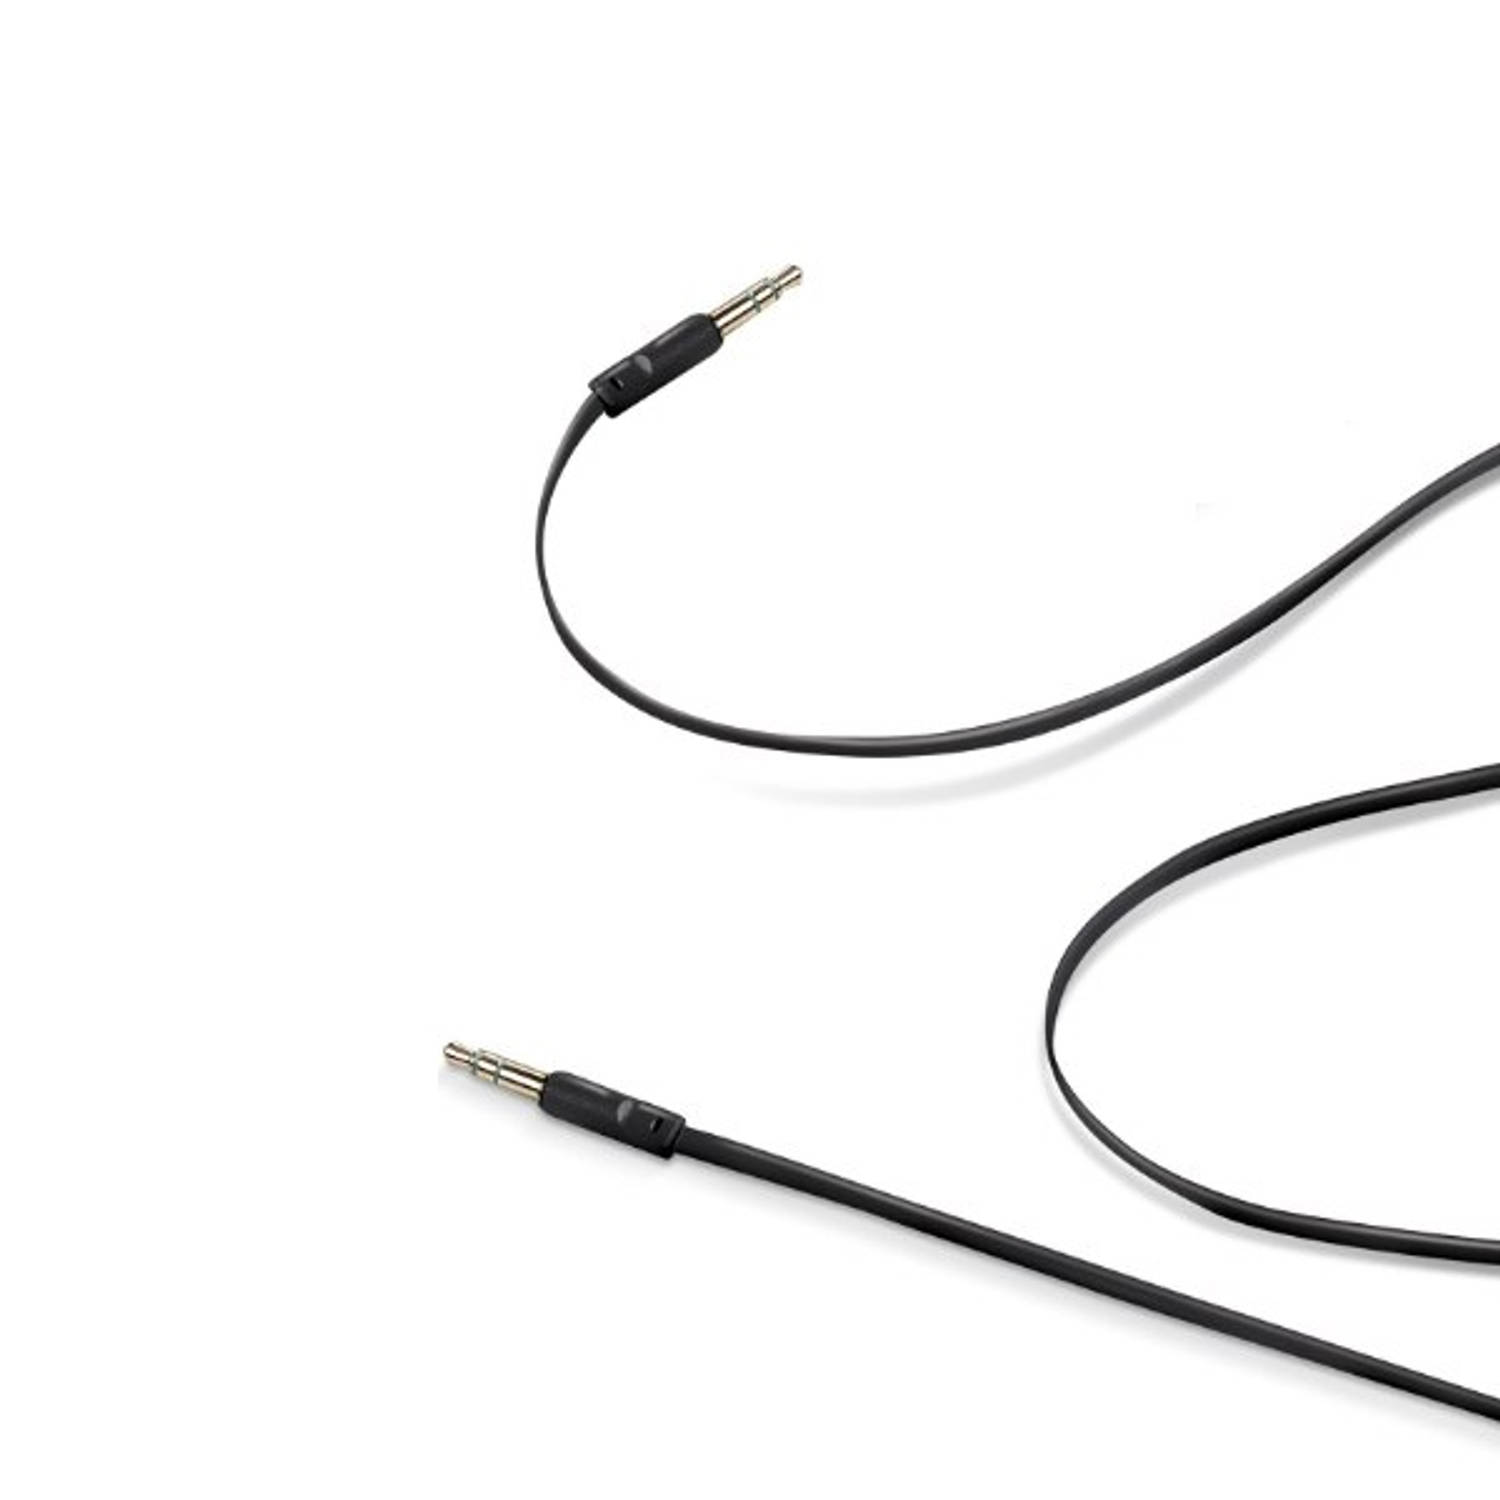 Celly Celly Audio 3.5mm Cable Black (LINEIN35BK)